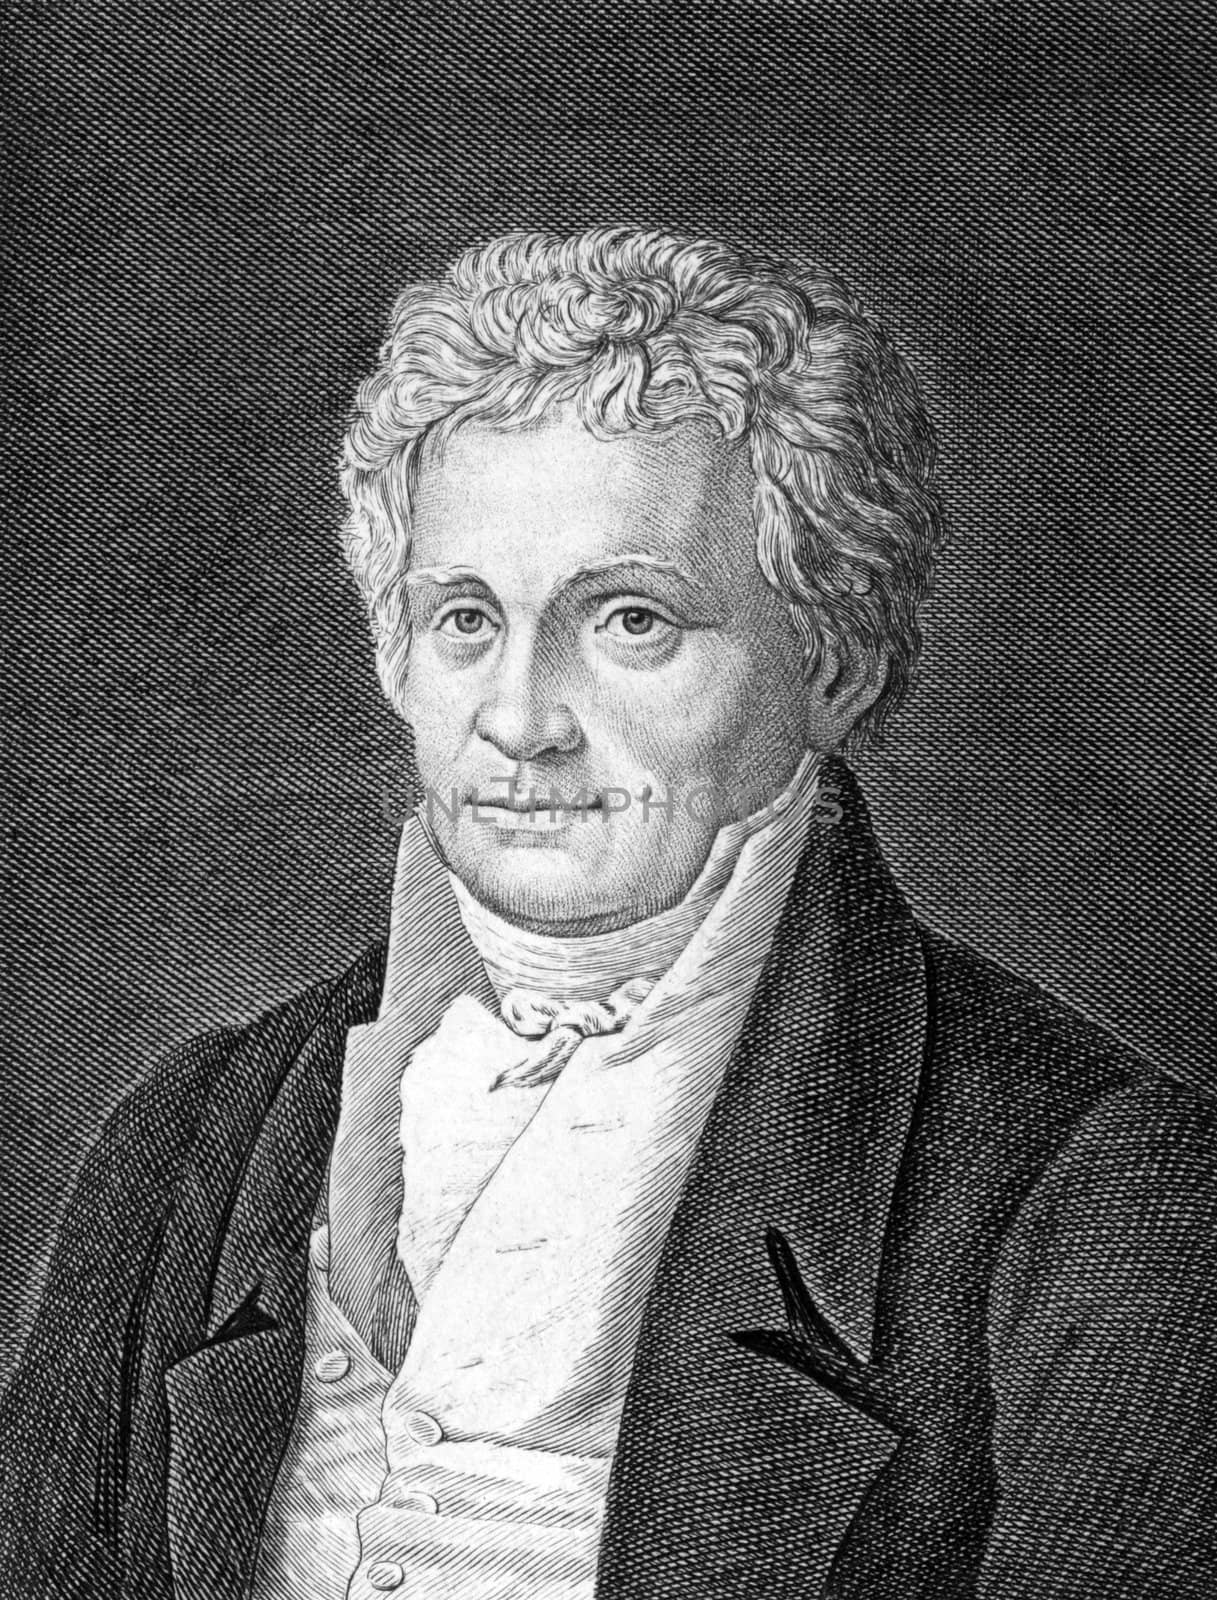 Ludwig Tieck (1773-1853) on engraving from 1859.  German poet, translator, editor, novelist, writer of Novellen and critic, Engraved by unknown artist and published in Meyers Konversations-Lexikon, Germany,1859.